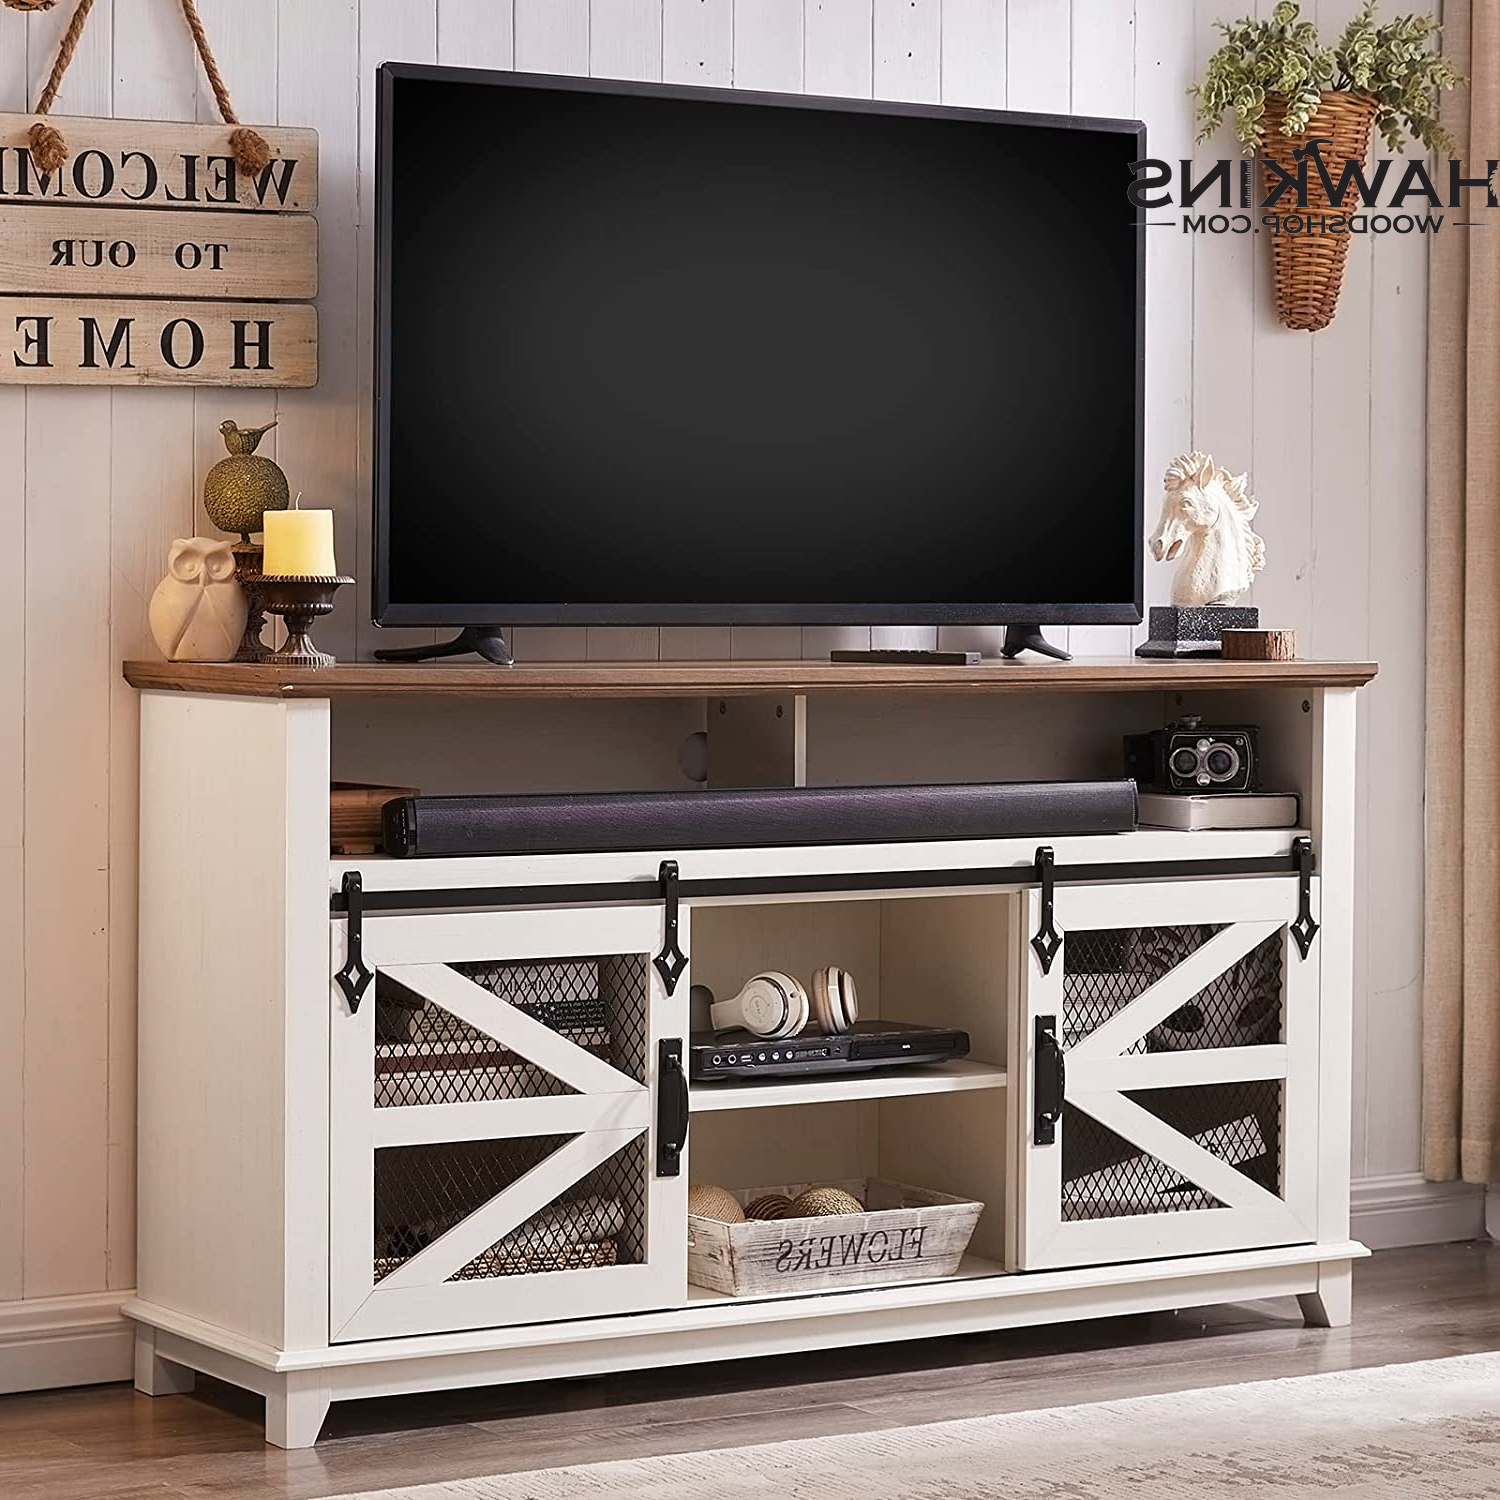 Sliding Barn Door Tv Stand, Industrial, Modern Media Entertainment Center W/sliding  Barn Door, Rustic Tv Console Cabinet, Adjustable Shelves, Antique White –  Built To Order, Made In Usa, Custom Furniture – Free With Regard To Barn Door Media Tv Stands (View 7 of 20)